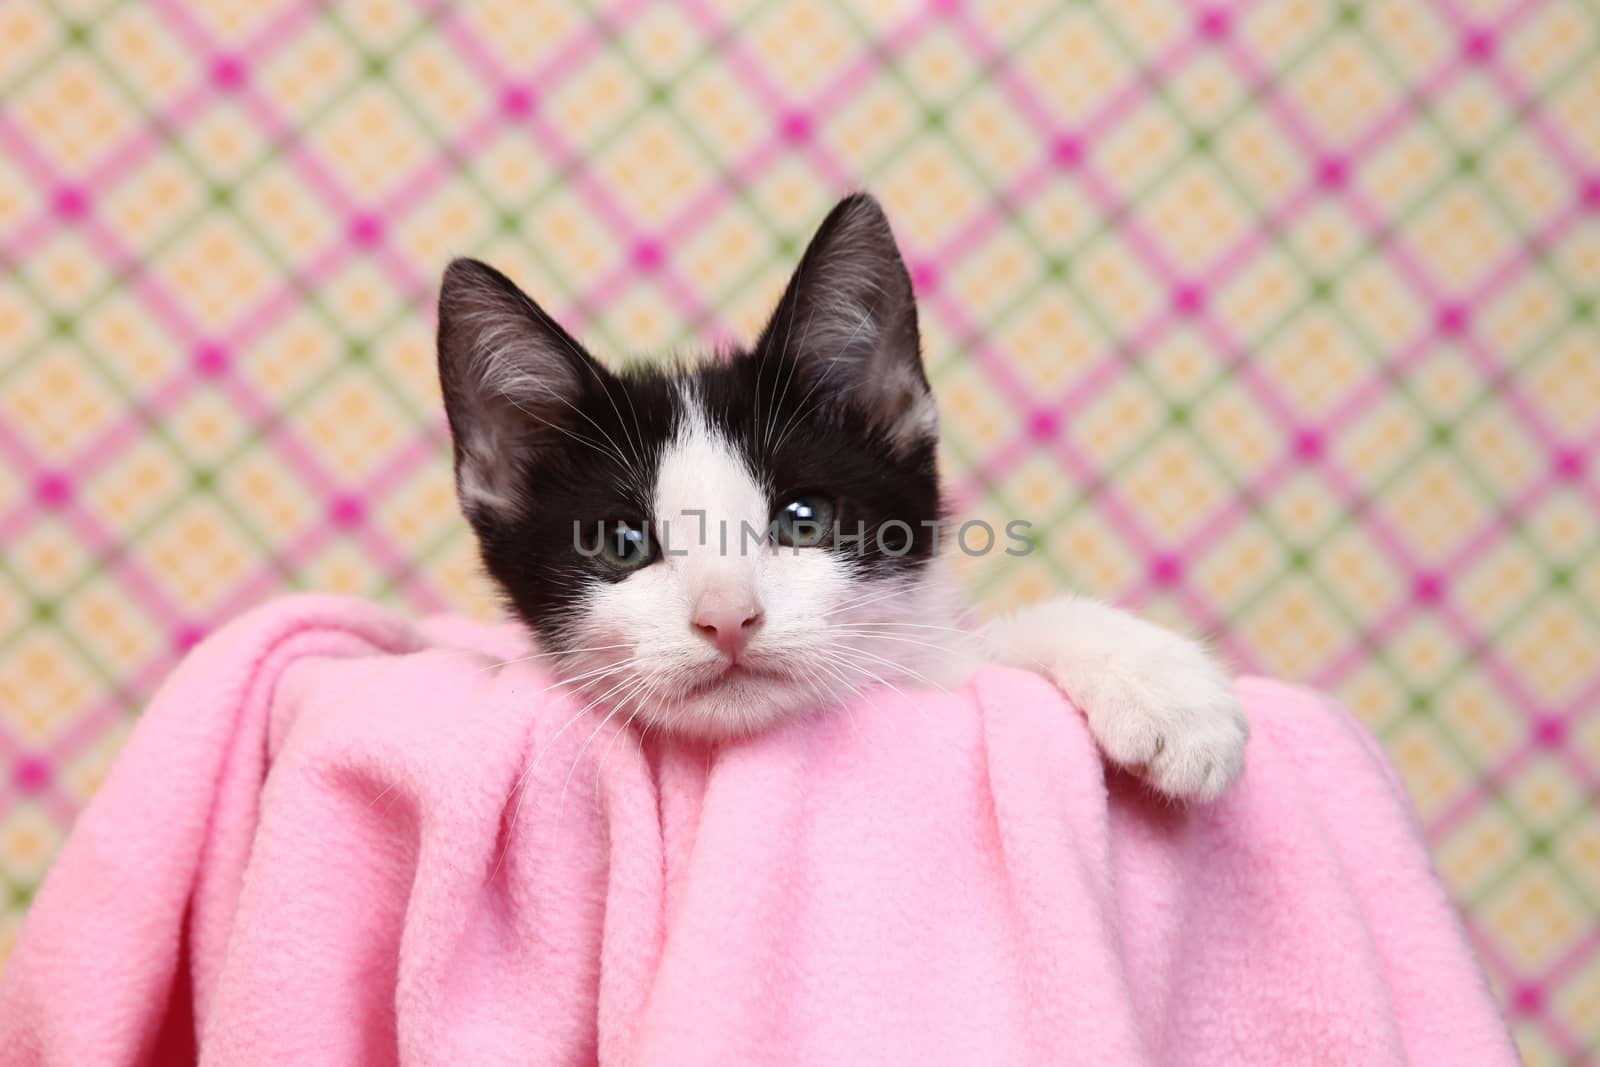 Sweet Kitten on a Pink Soft Background